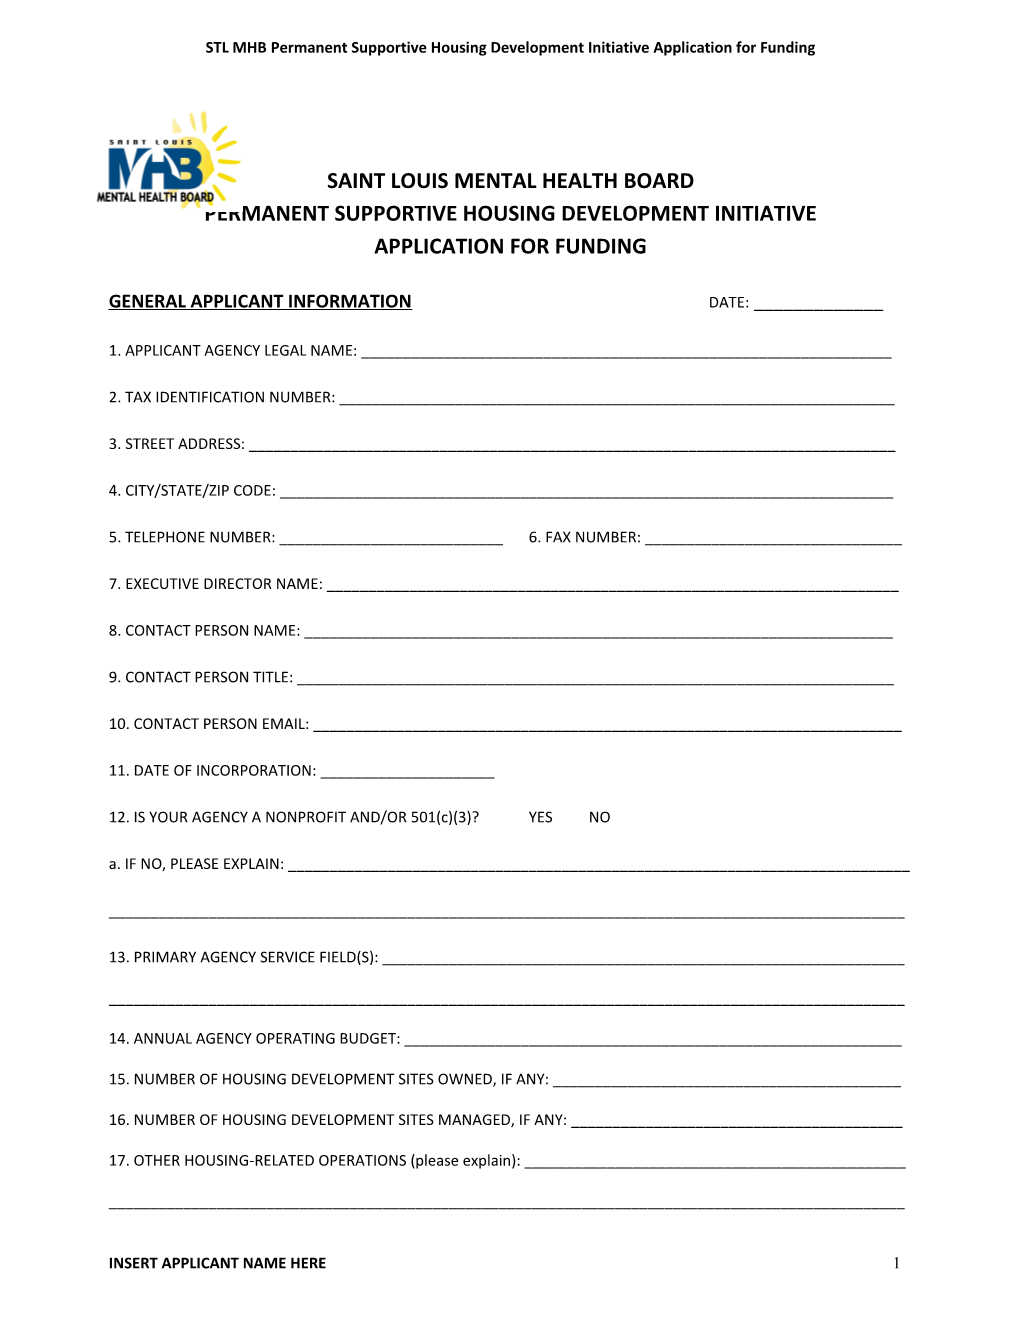 STL MHB Permanent Supportive Housing Development Initiative Application for Funding